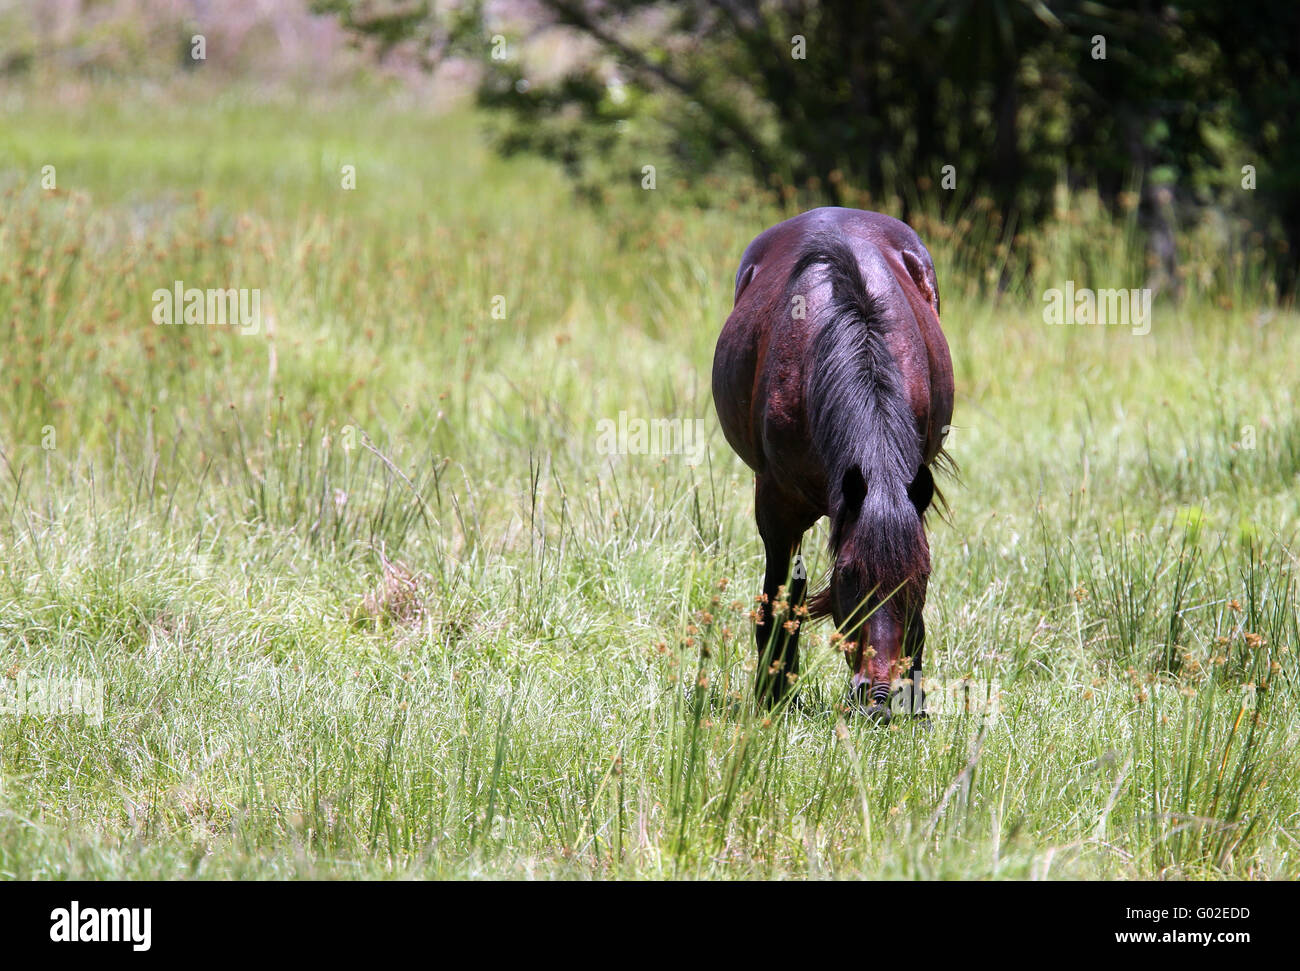 Grazing horse in the Florida sunshine. April 2016 Stock Photo